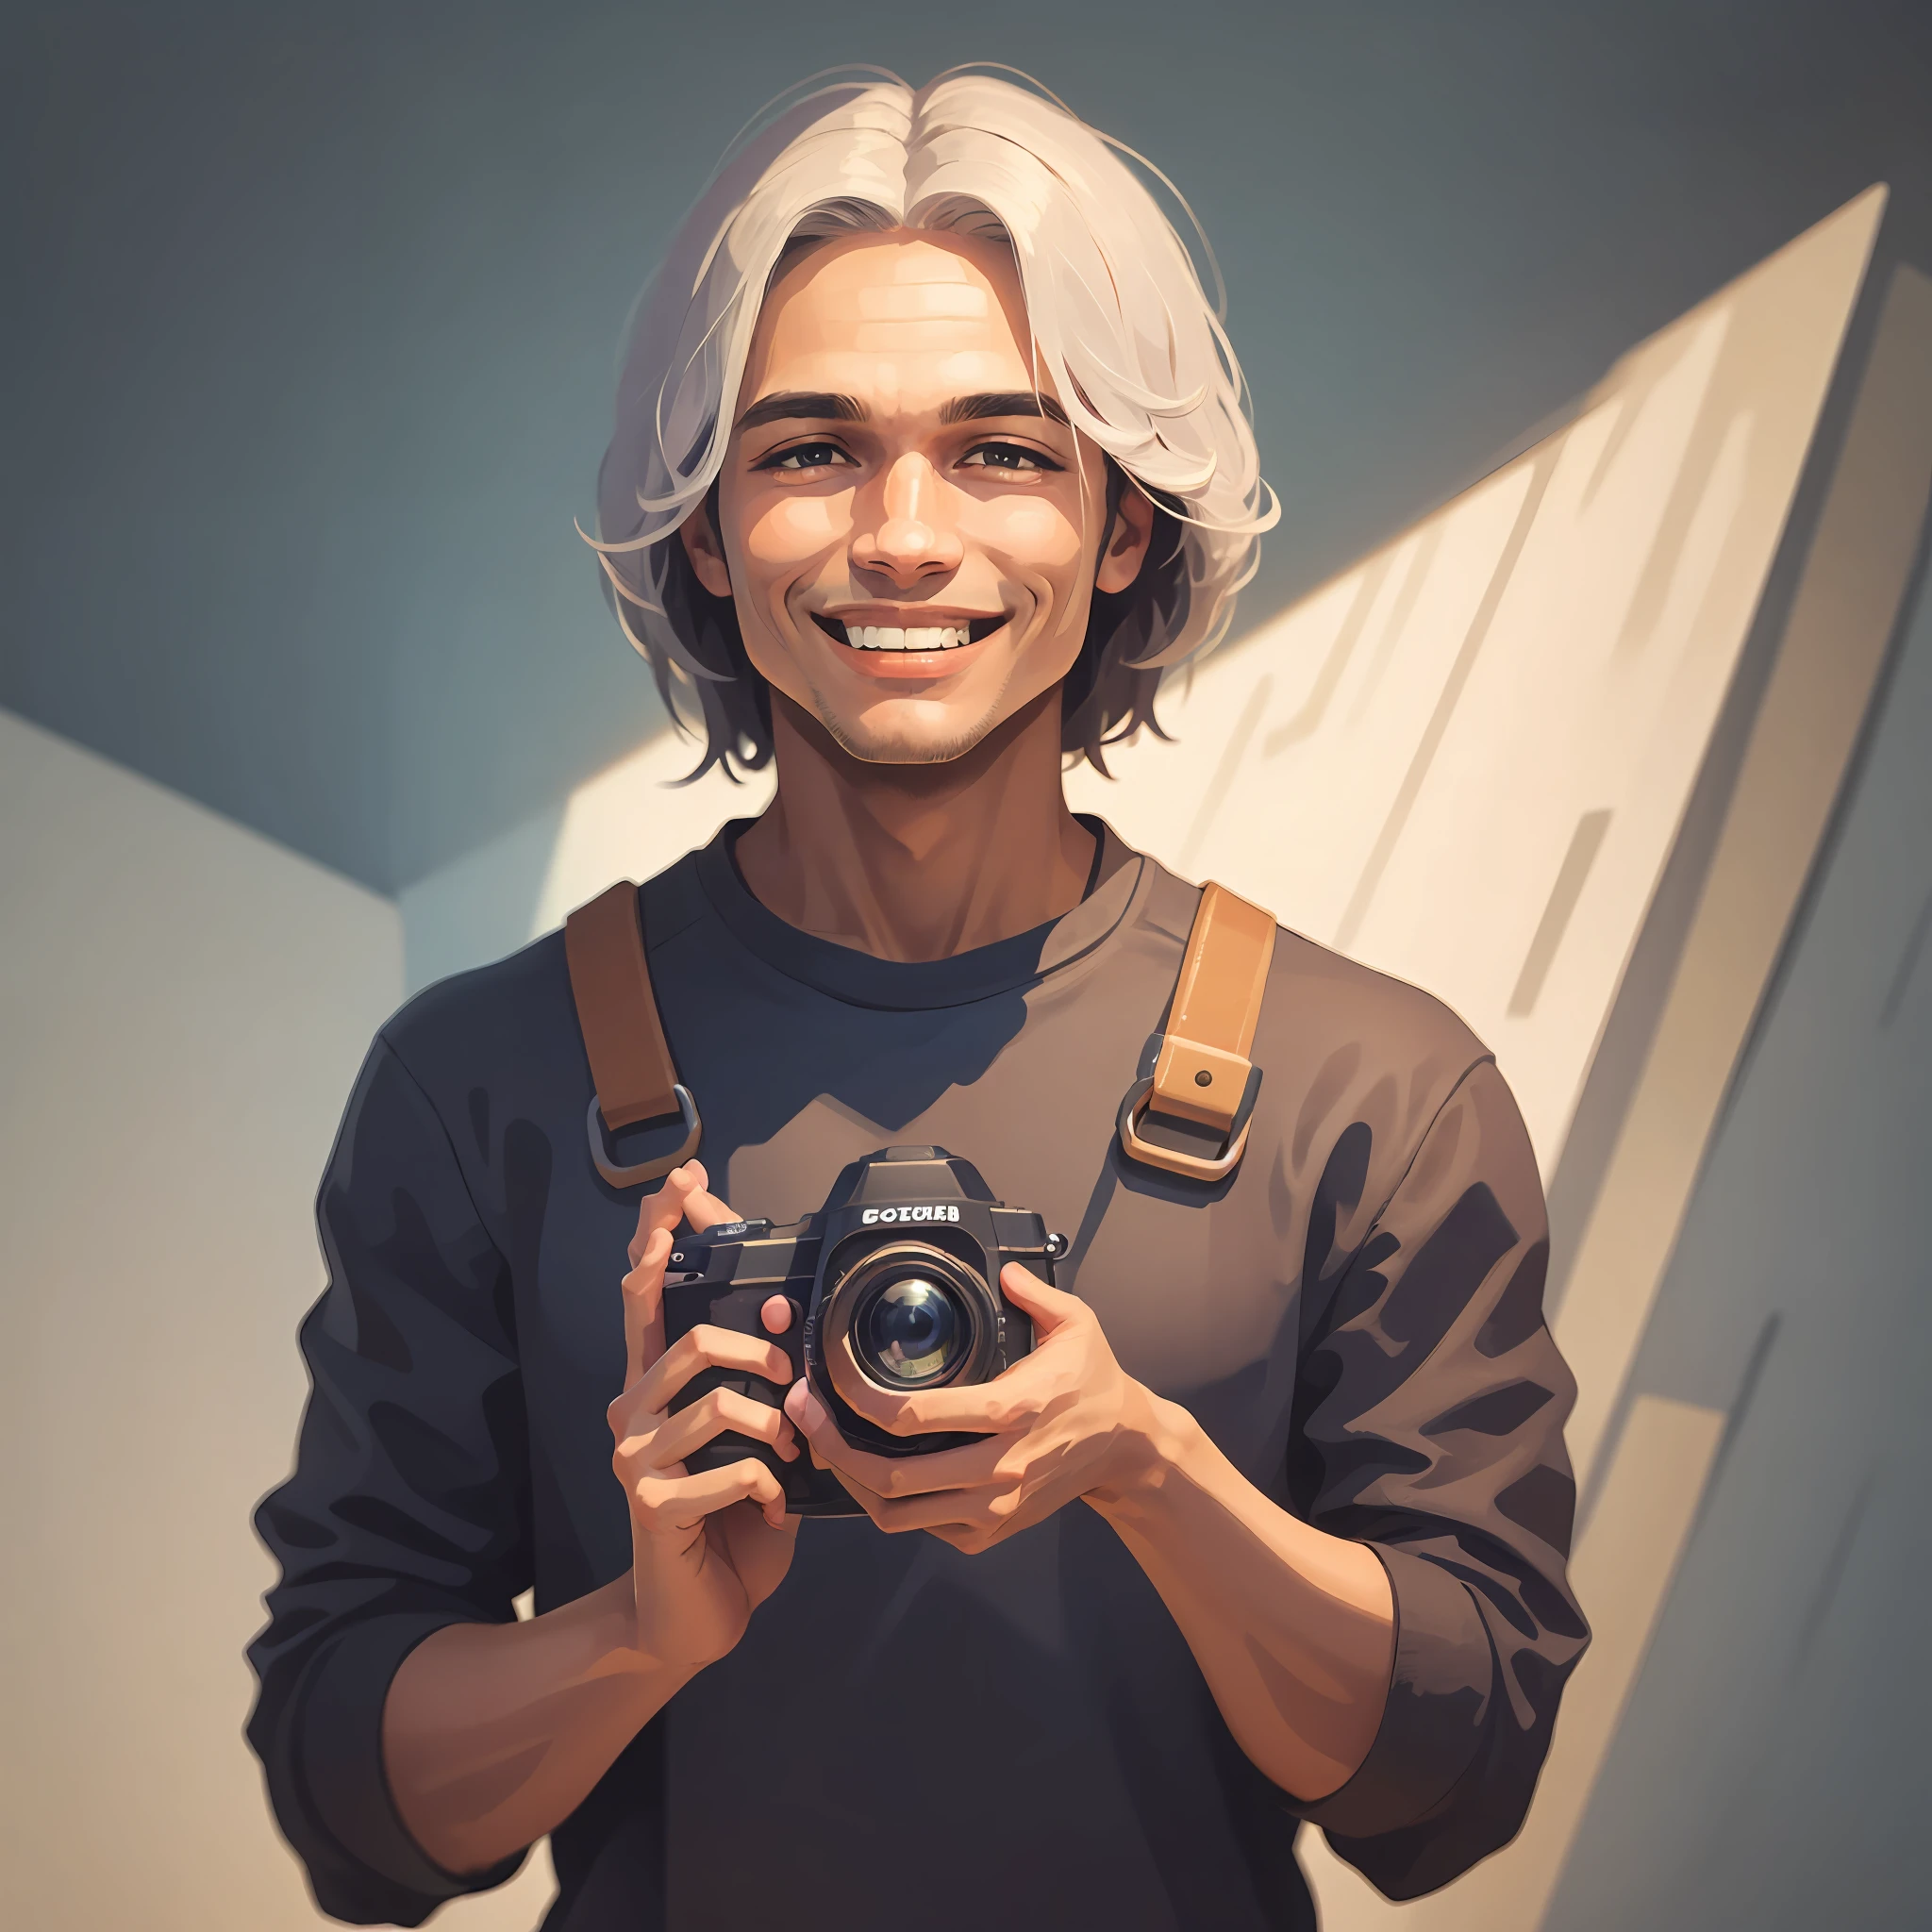 An image of a young man, with dark hair and expressive eyes, smiling casually. He's holding a camera in his hands, showing his passion for photography. --auto